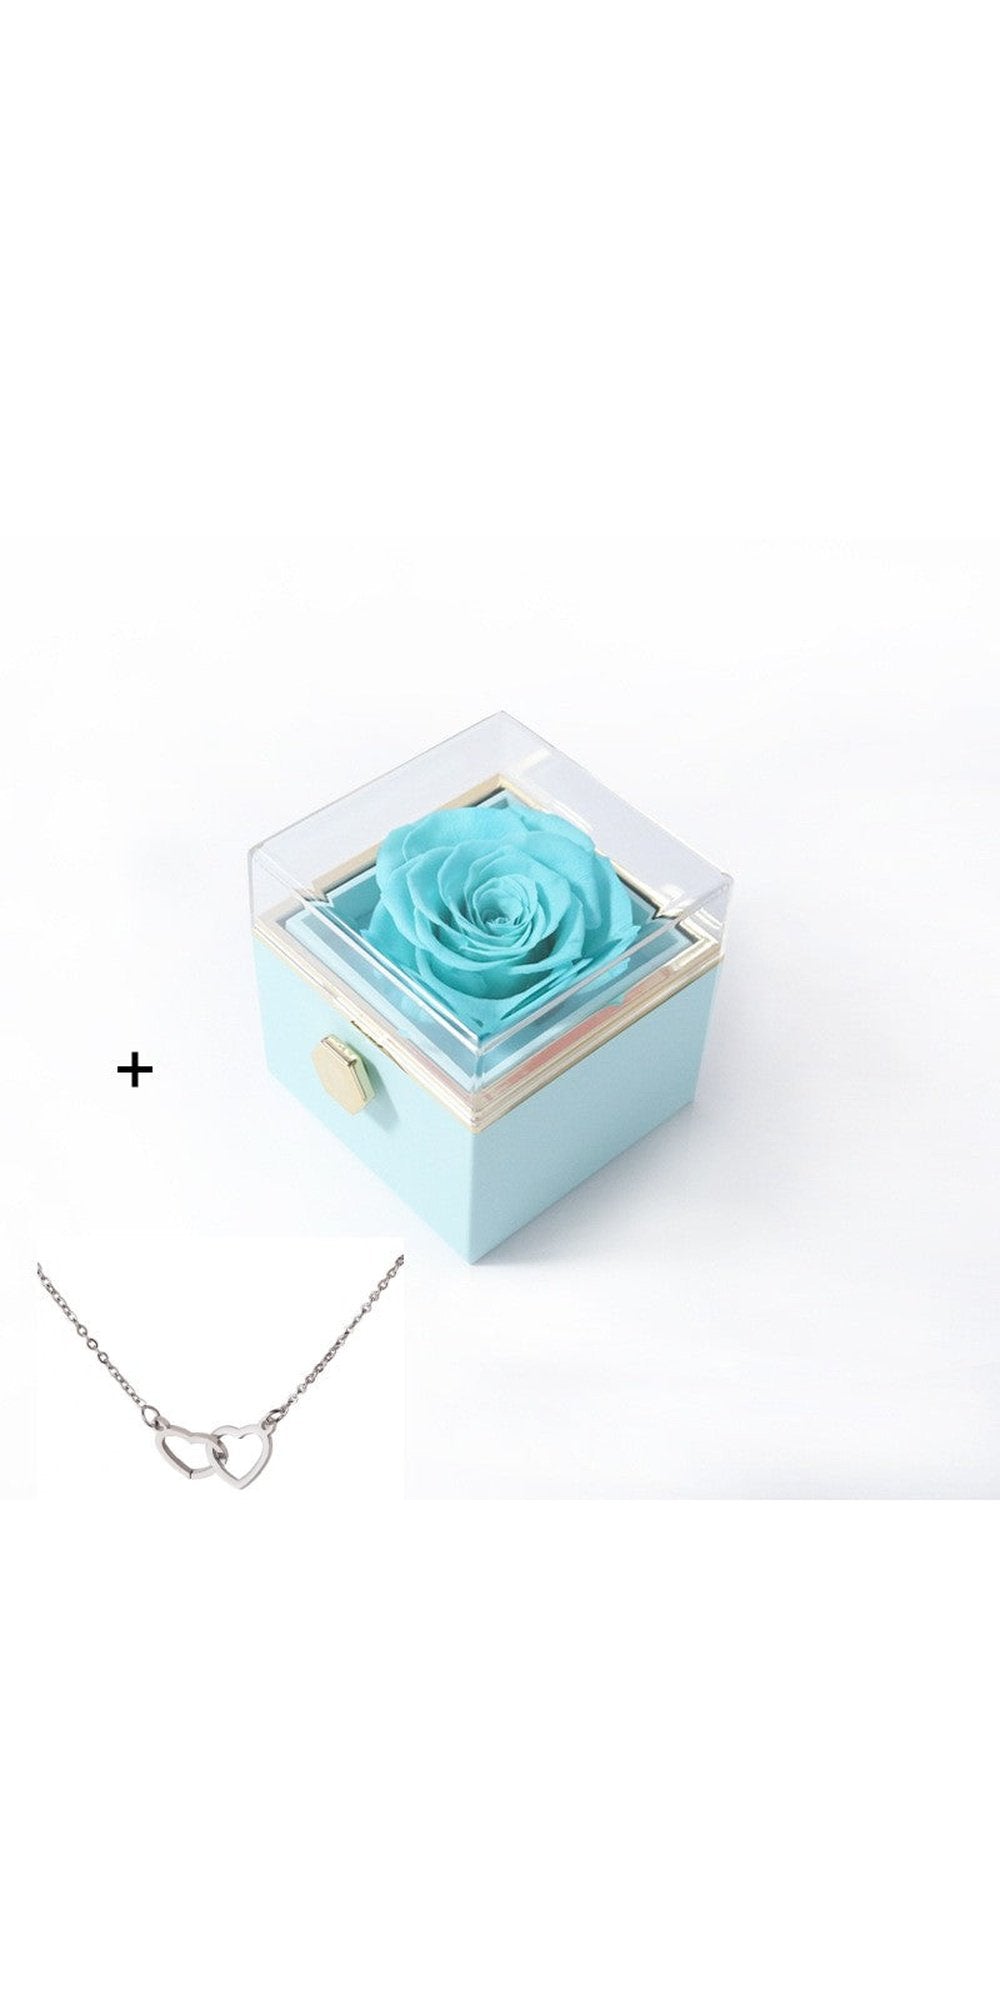 Acrylic Ring Box Valentine’s Day Proposal Confession - Blue